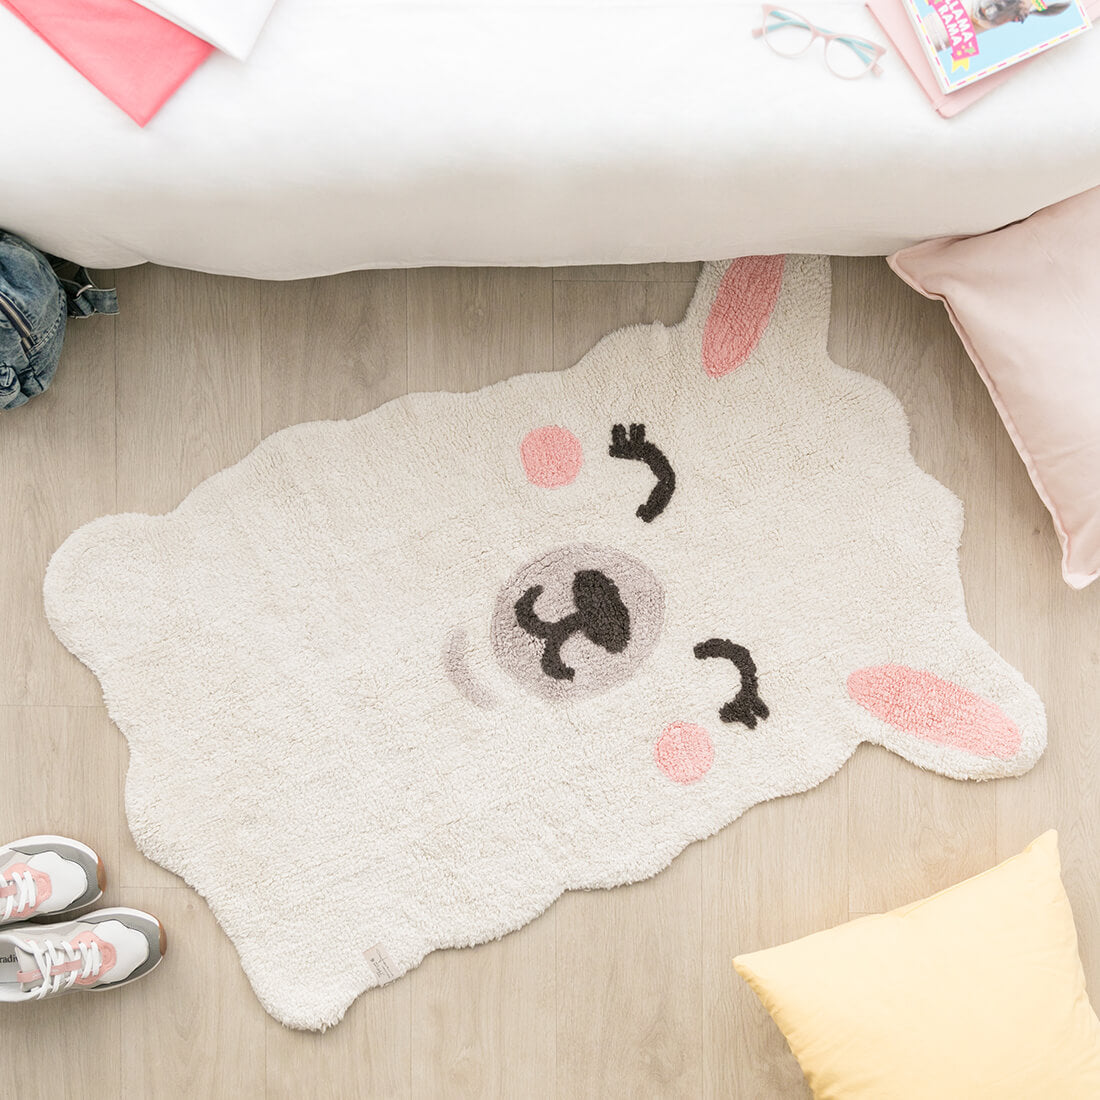  cotton tufted rug shaped as a smiling llama